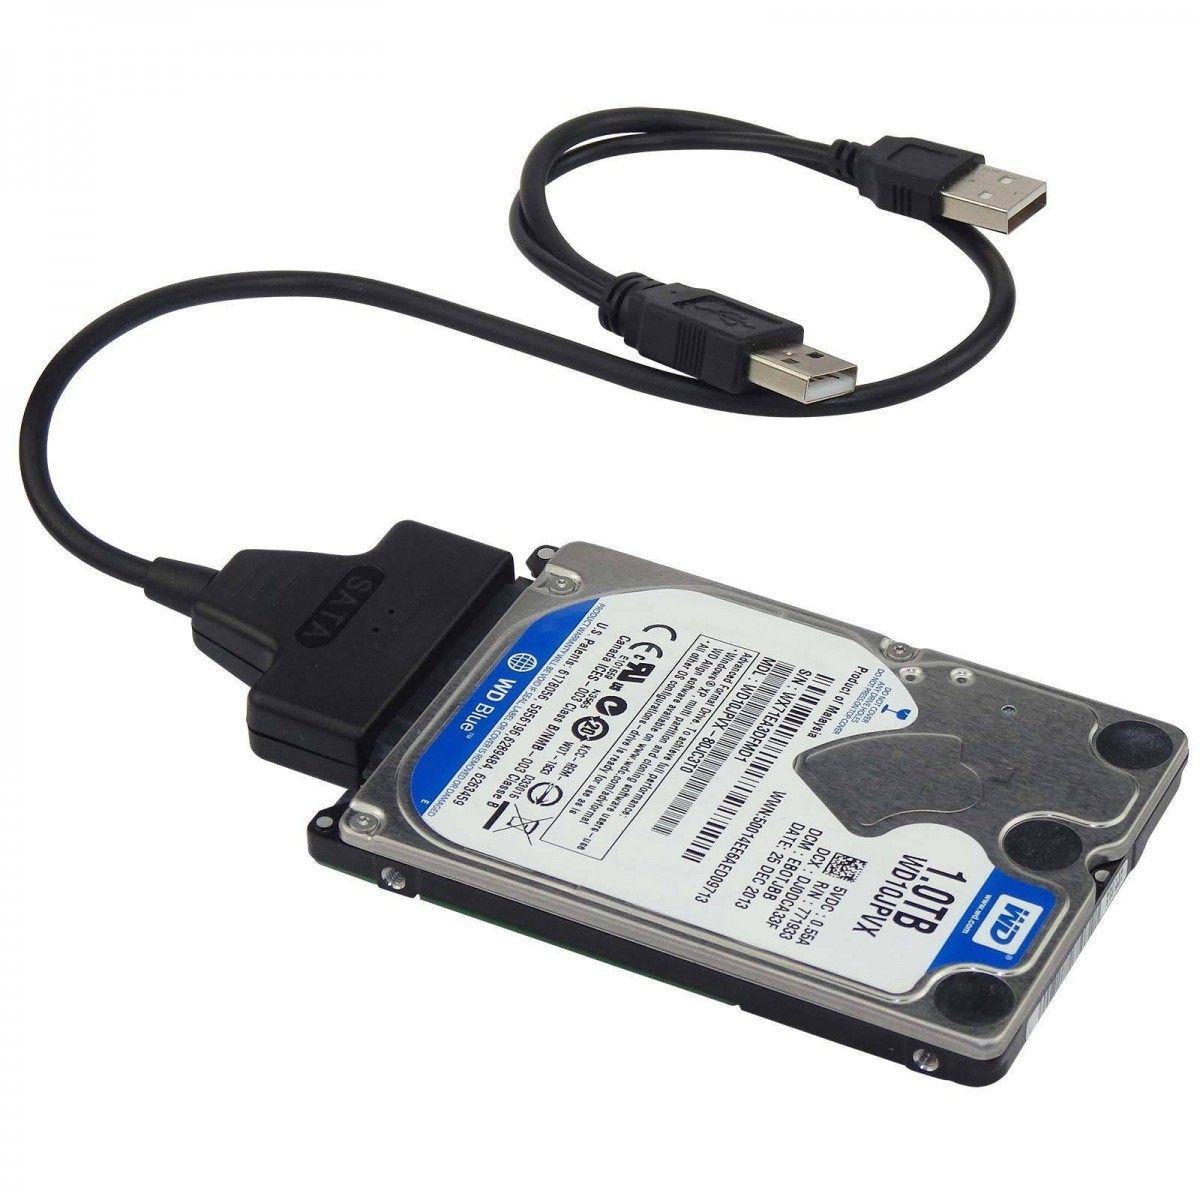 ✓ cable to SATA 2.5 hard disk HDD SSD Adapter Converter"